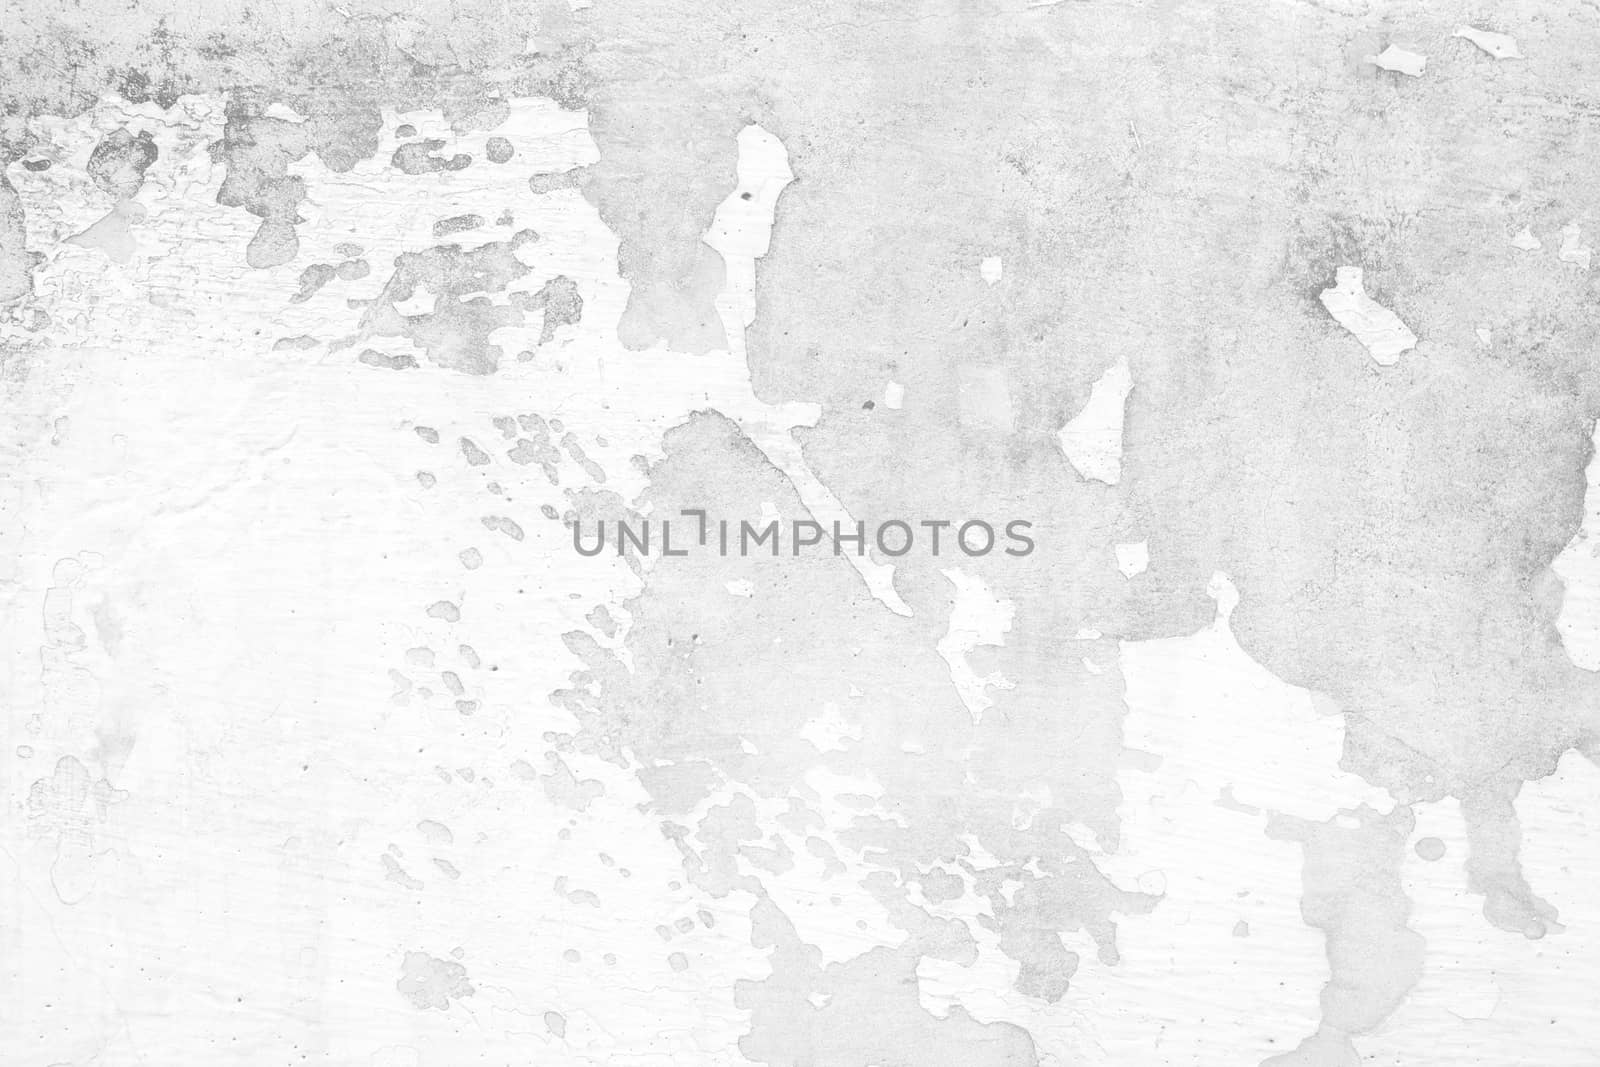 White Grunge Peeling Painted Concrete Wall Texture Background. by mesamong